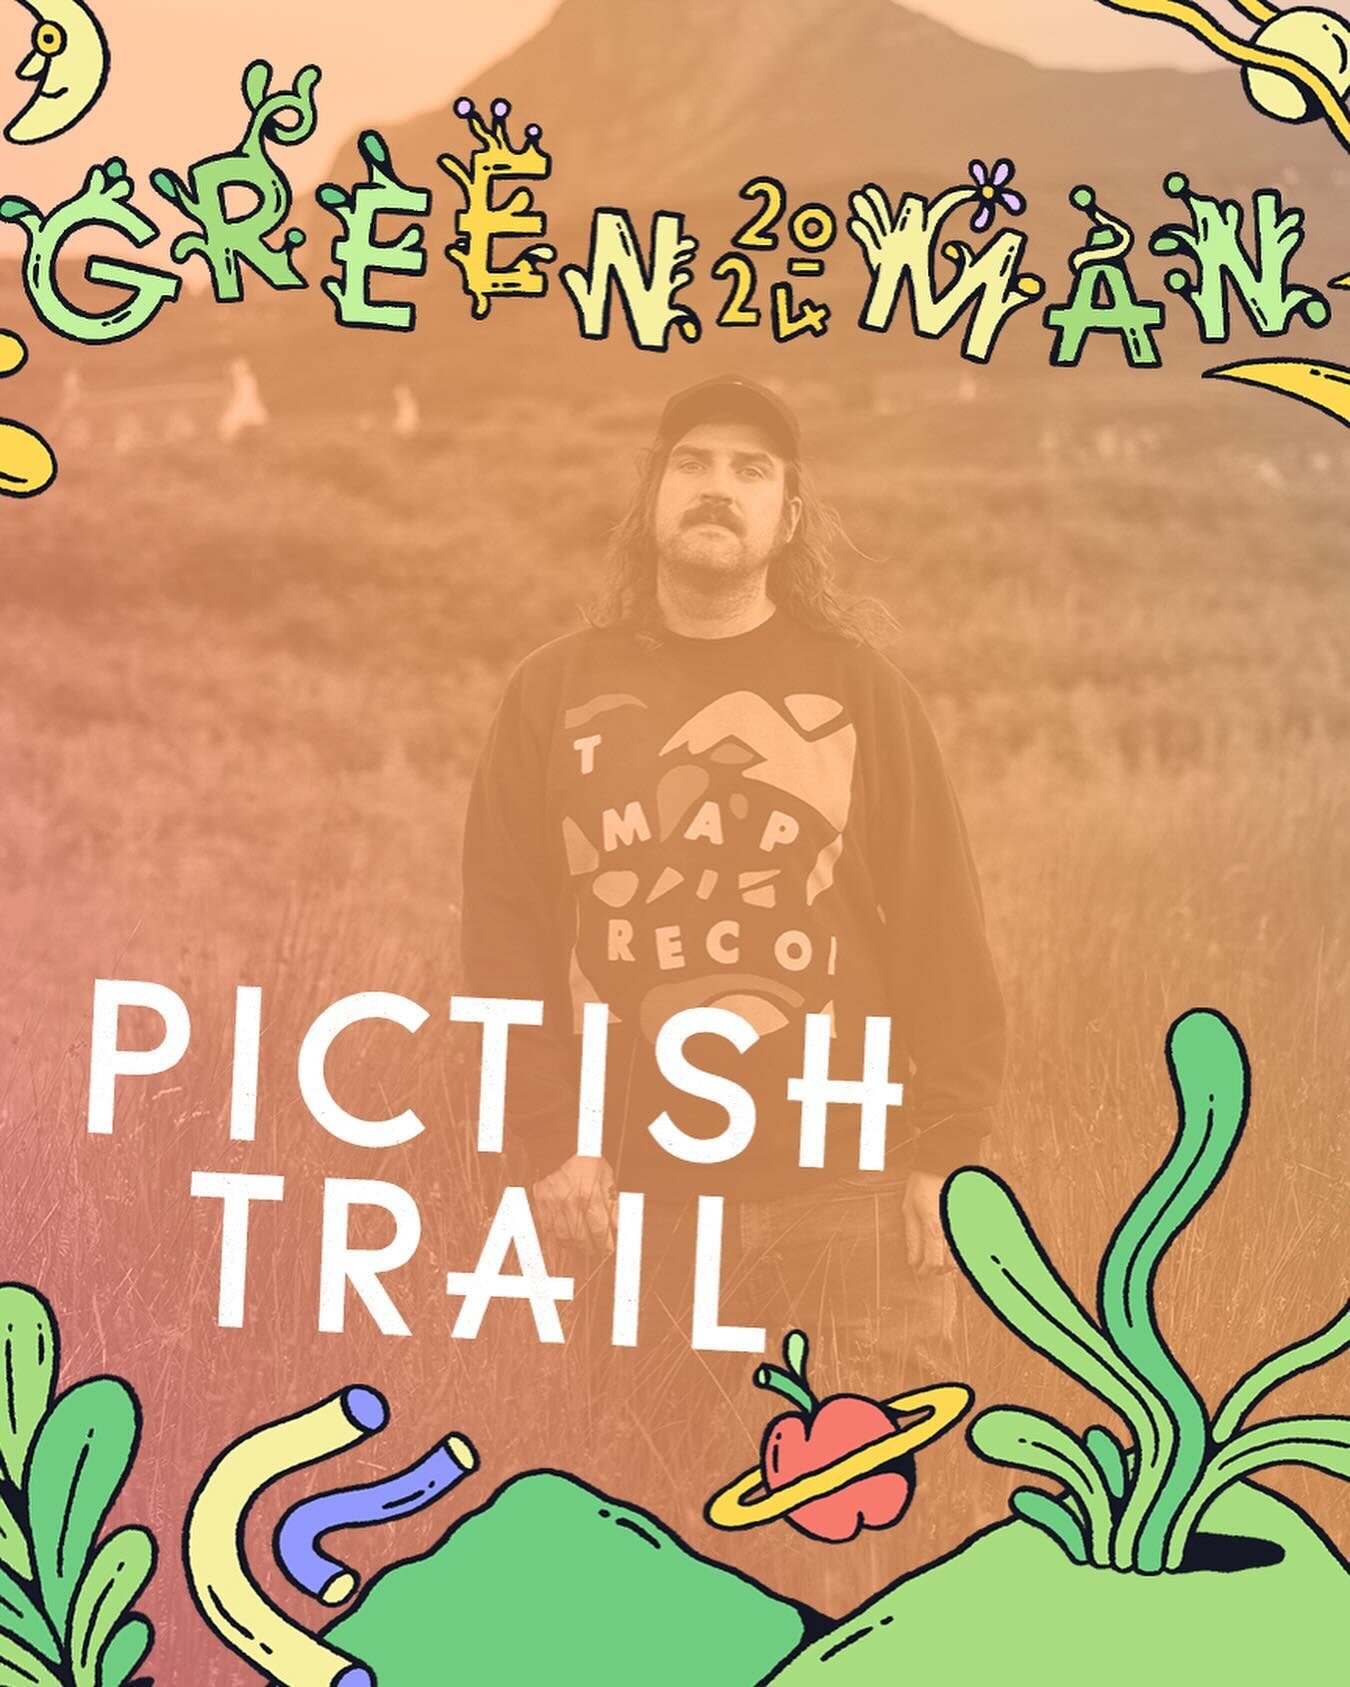 💚💚💚💚💚 GREEN MAN 💚💚💚💚💚

Returning to the best place on earth, this August 🥰

Have a swipe ➡️ to see the full @greenmanfest line-up. So much great stuff I love, and loads and LOADS of acts I&rsquo;m keen to discover and see live for the firs